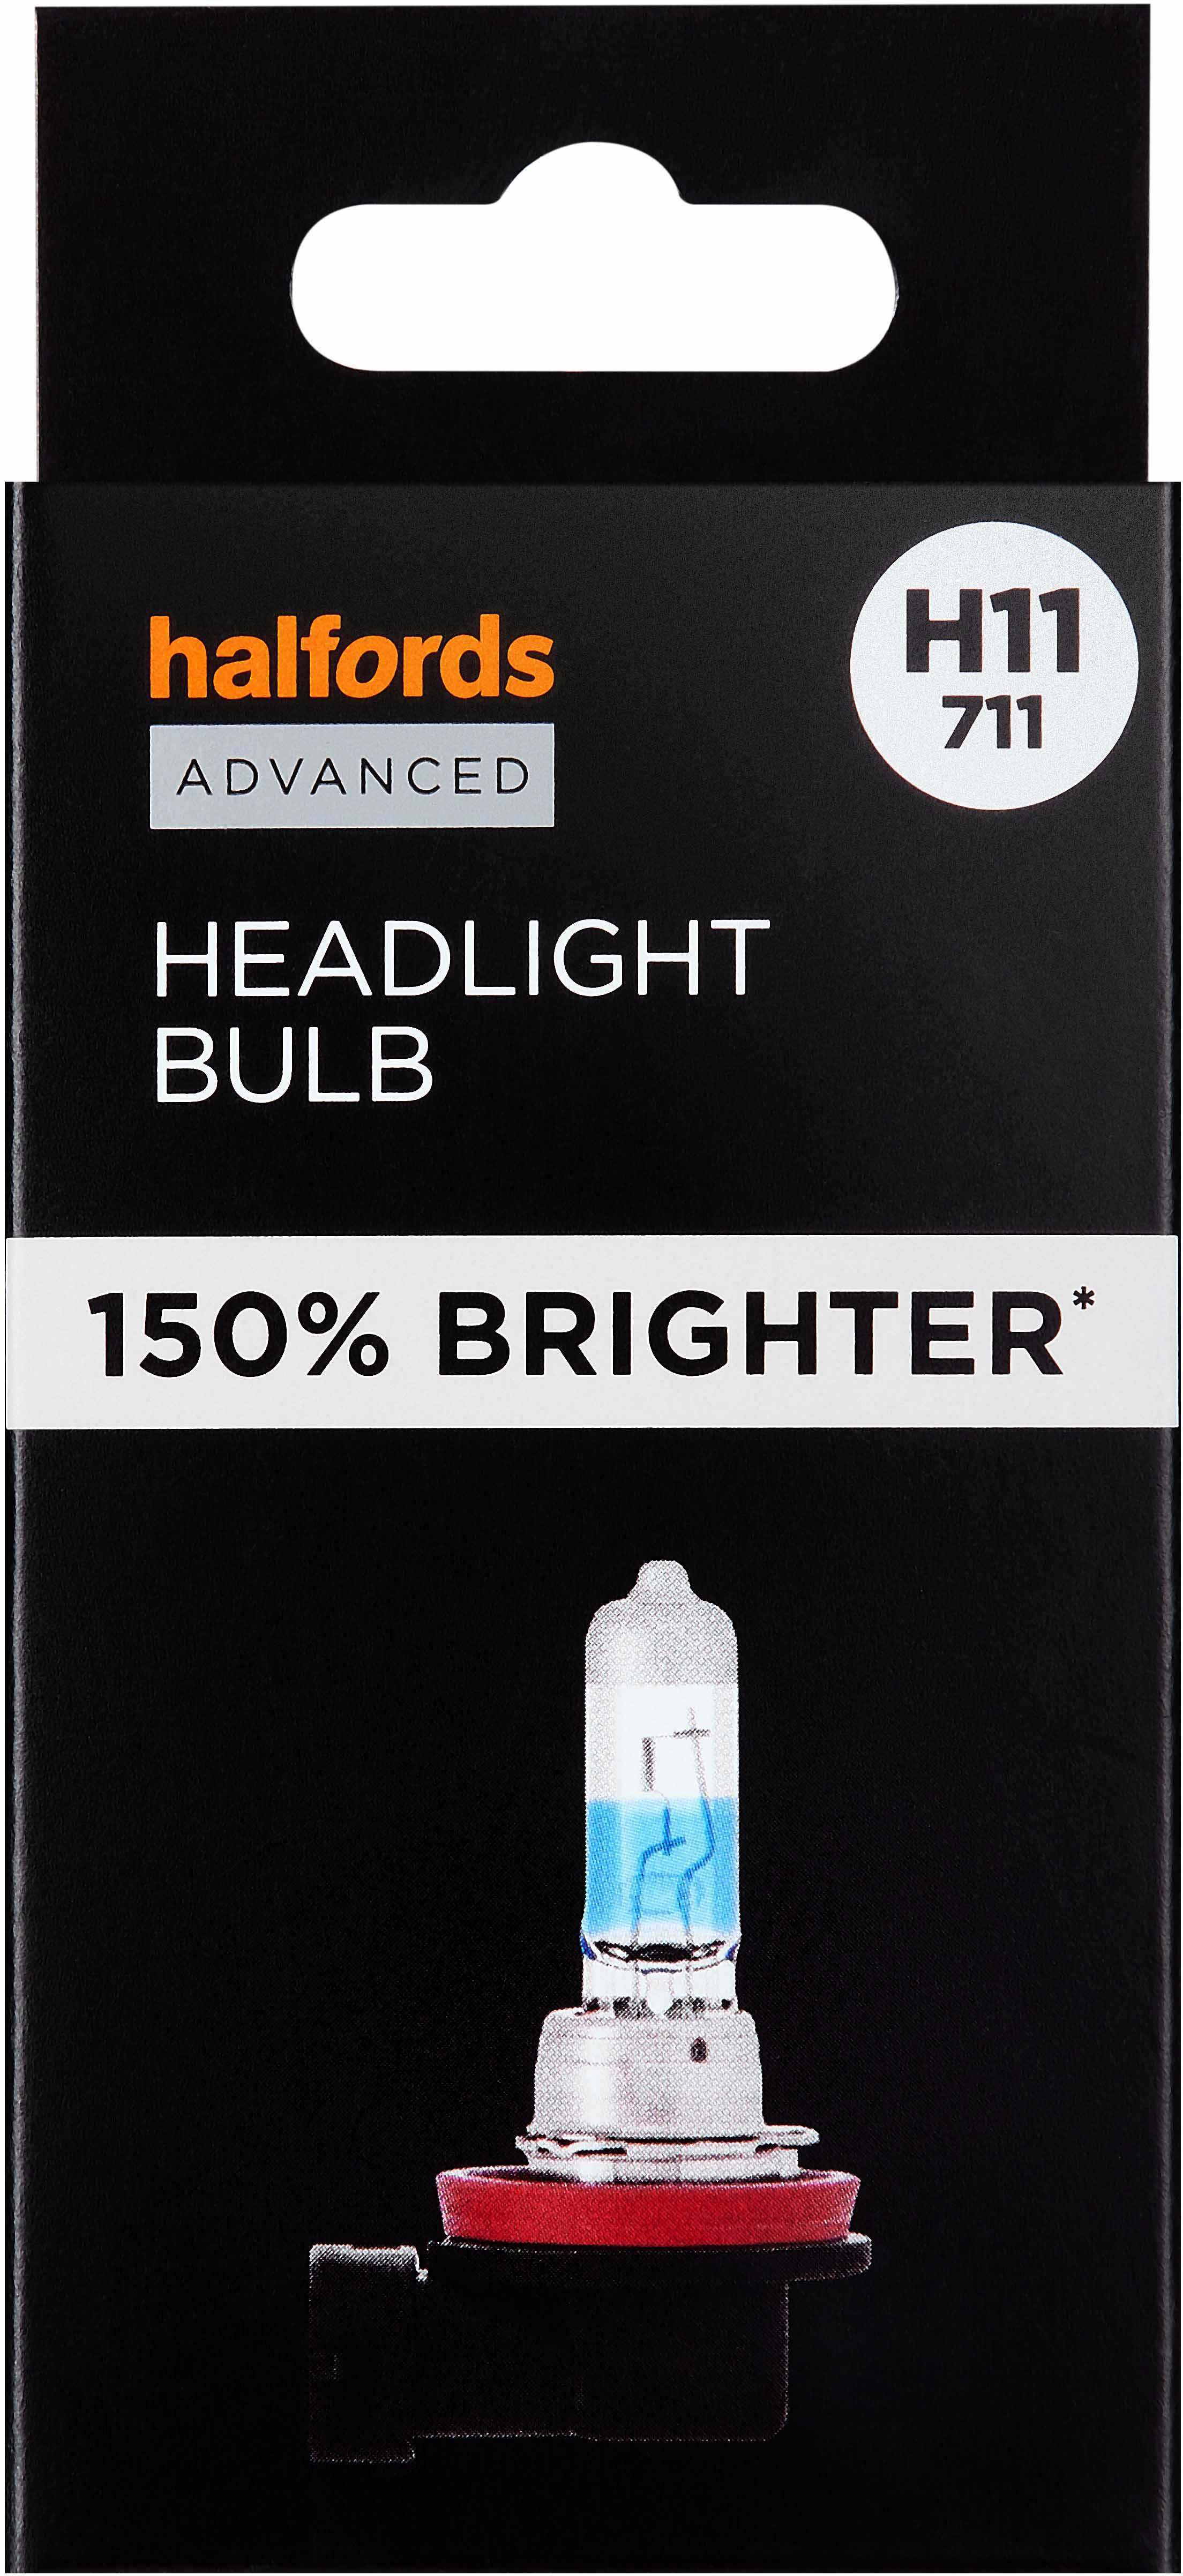 H11 711 Car Headlight Bulb Halfords Advanced Up To +150 Percent Single Pack